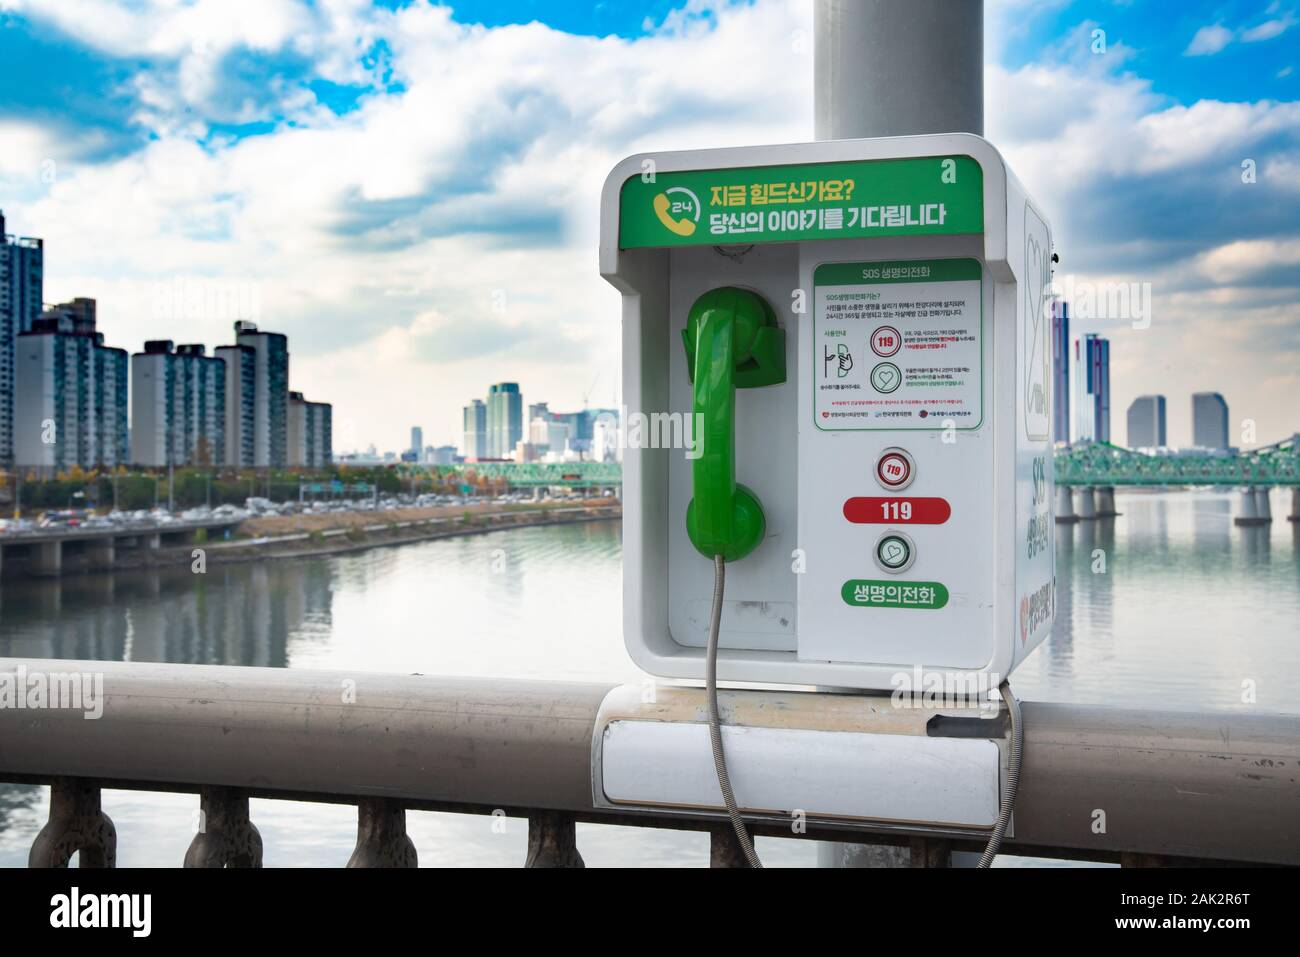 Seoul, South Korea - Nov 2019:The Han River Bridge in Seoul has a 'Phone of Love' for the purpose of preventing suicide. Stock Photo